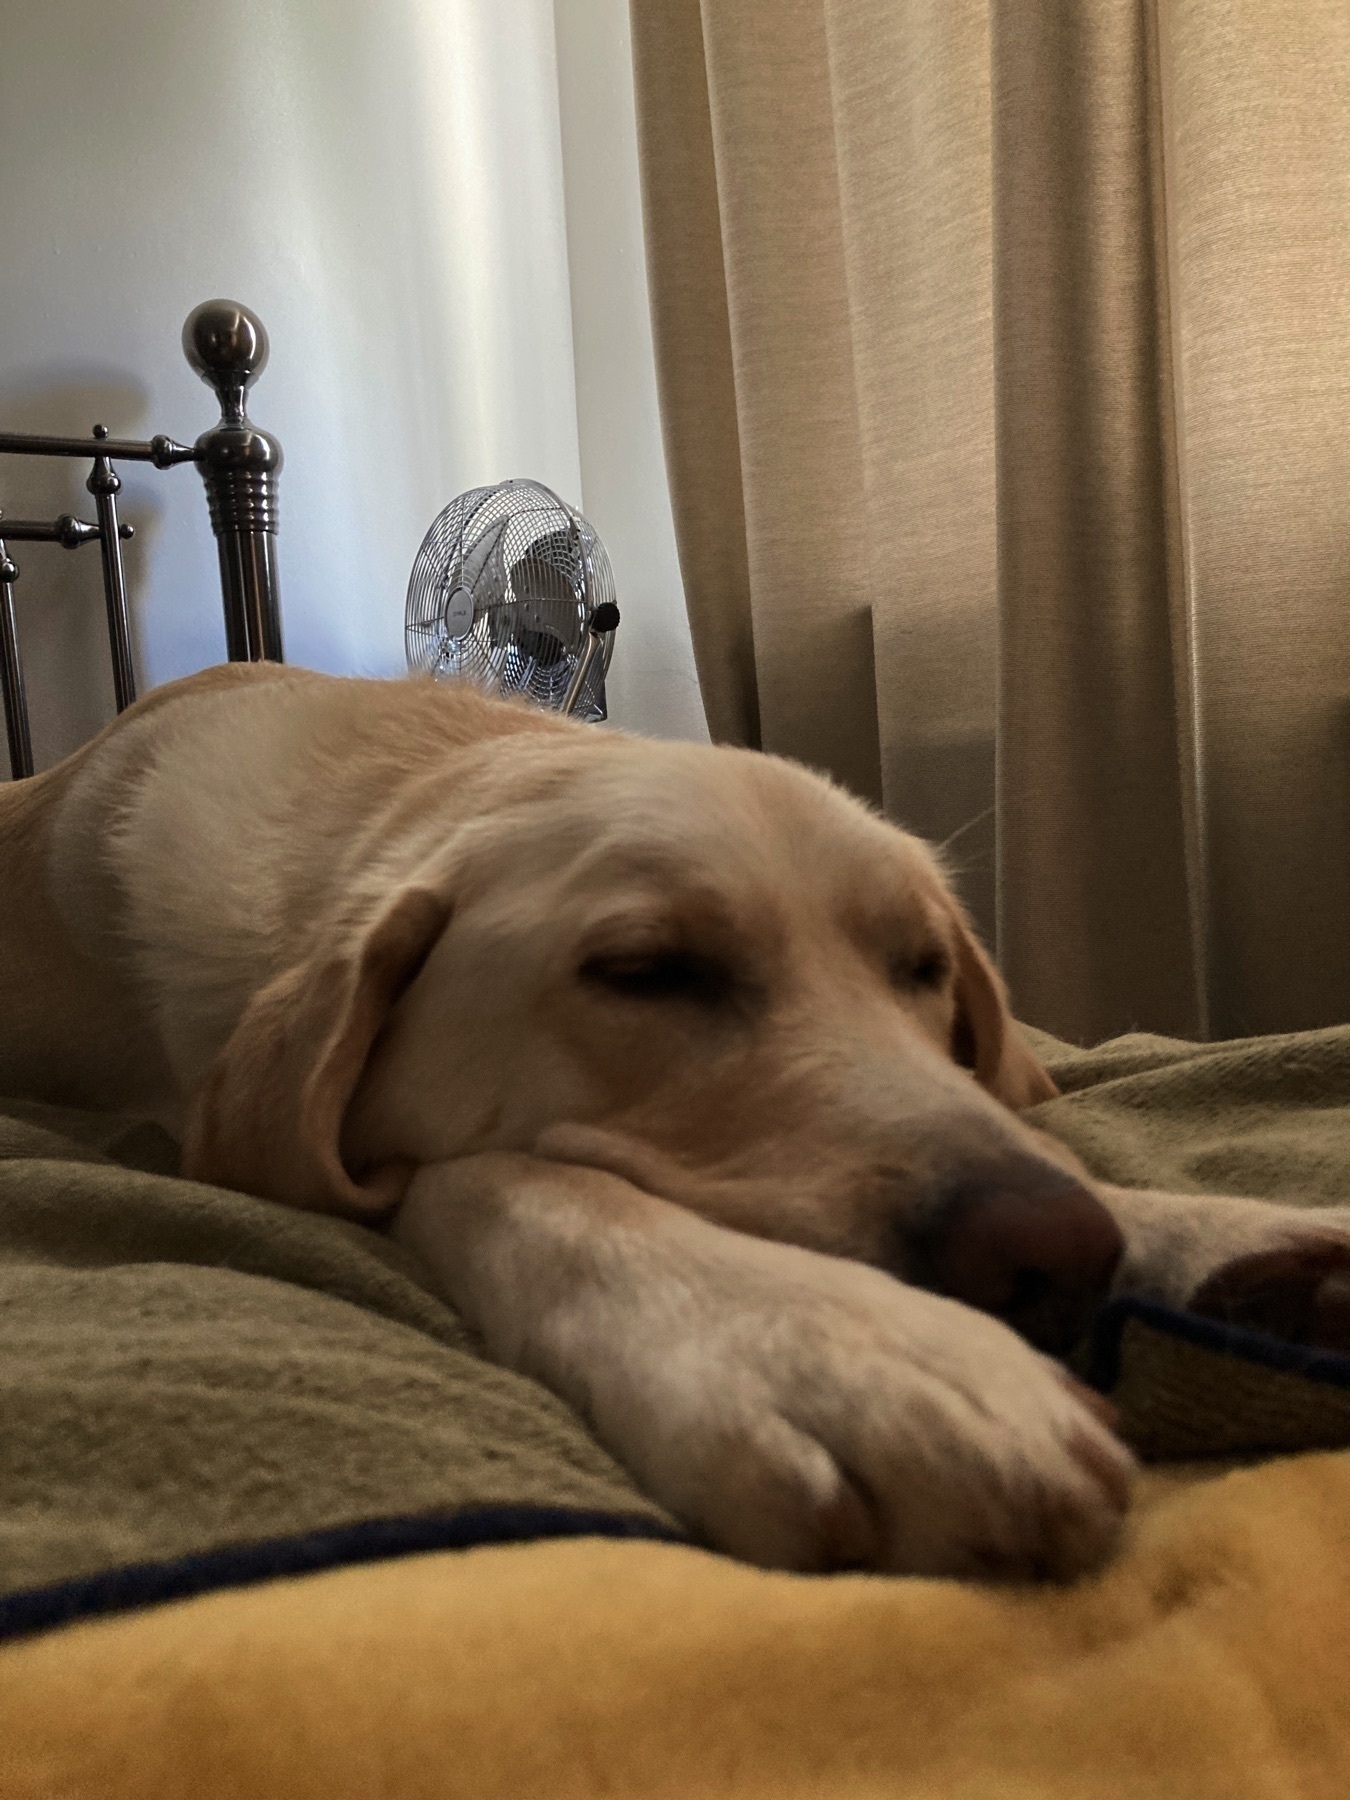 A golden retriever/labrador lying atop a bed, with his head tucked between his outstretched front legs and his eyes almost closed.